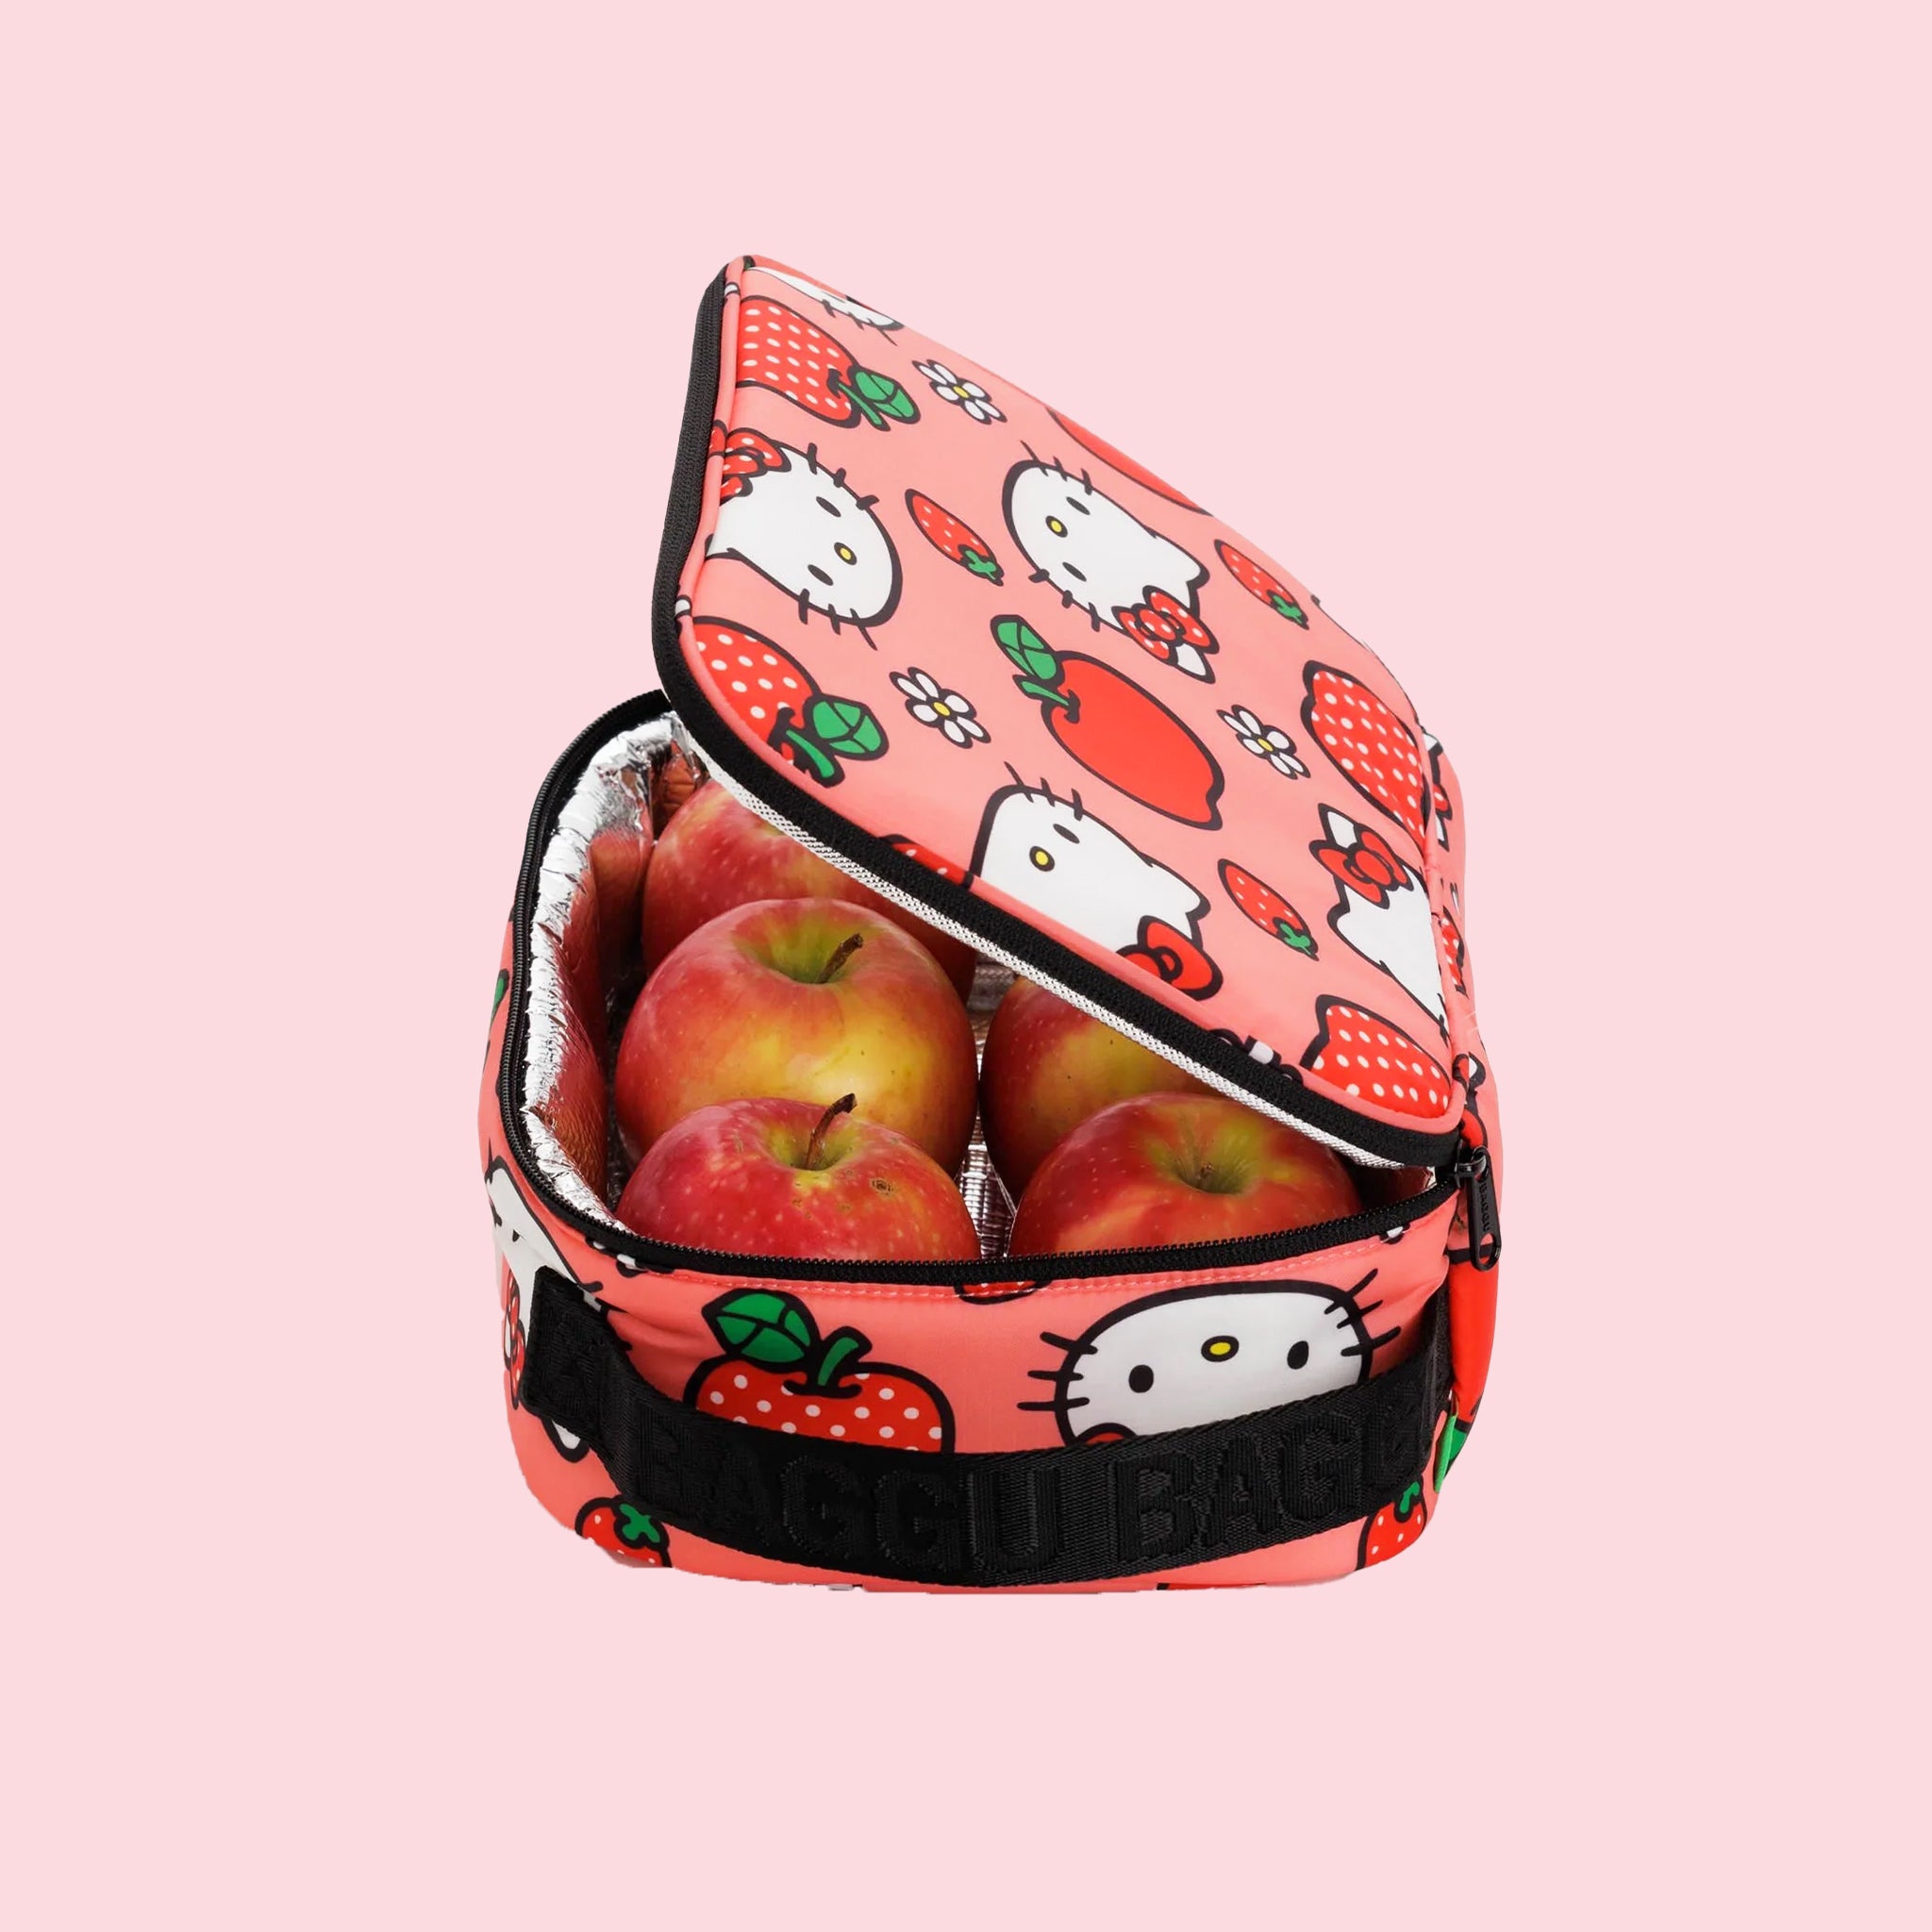 A pink and red lunch box with a Hello Kitty Apple pattern and black strap.